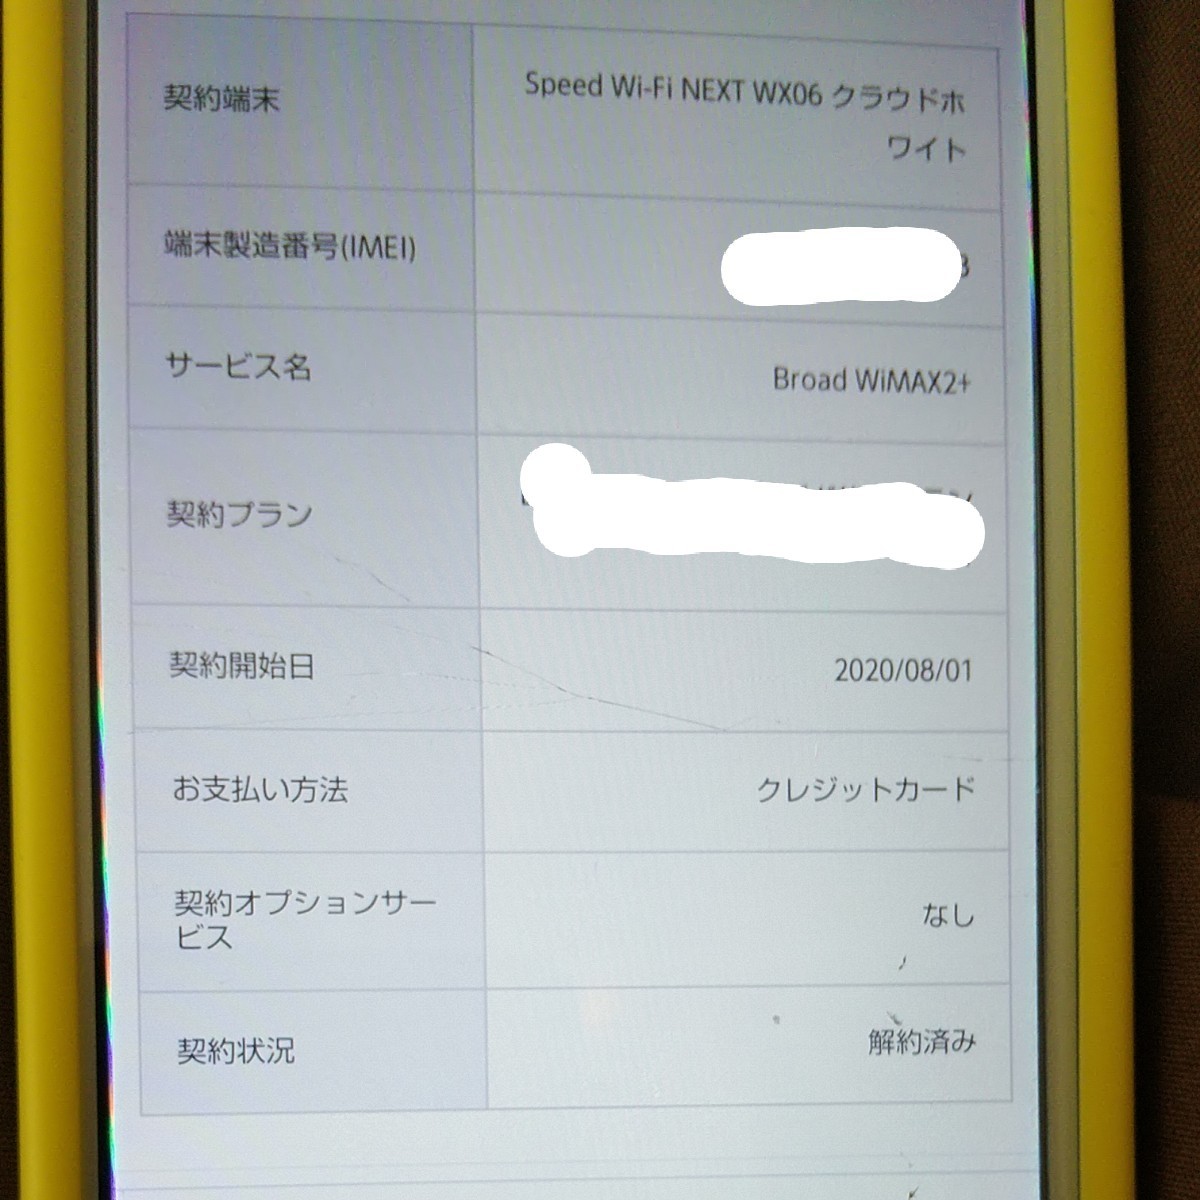 WiMAX2+　wx06　クレードルセット